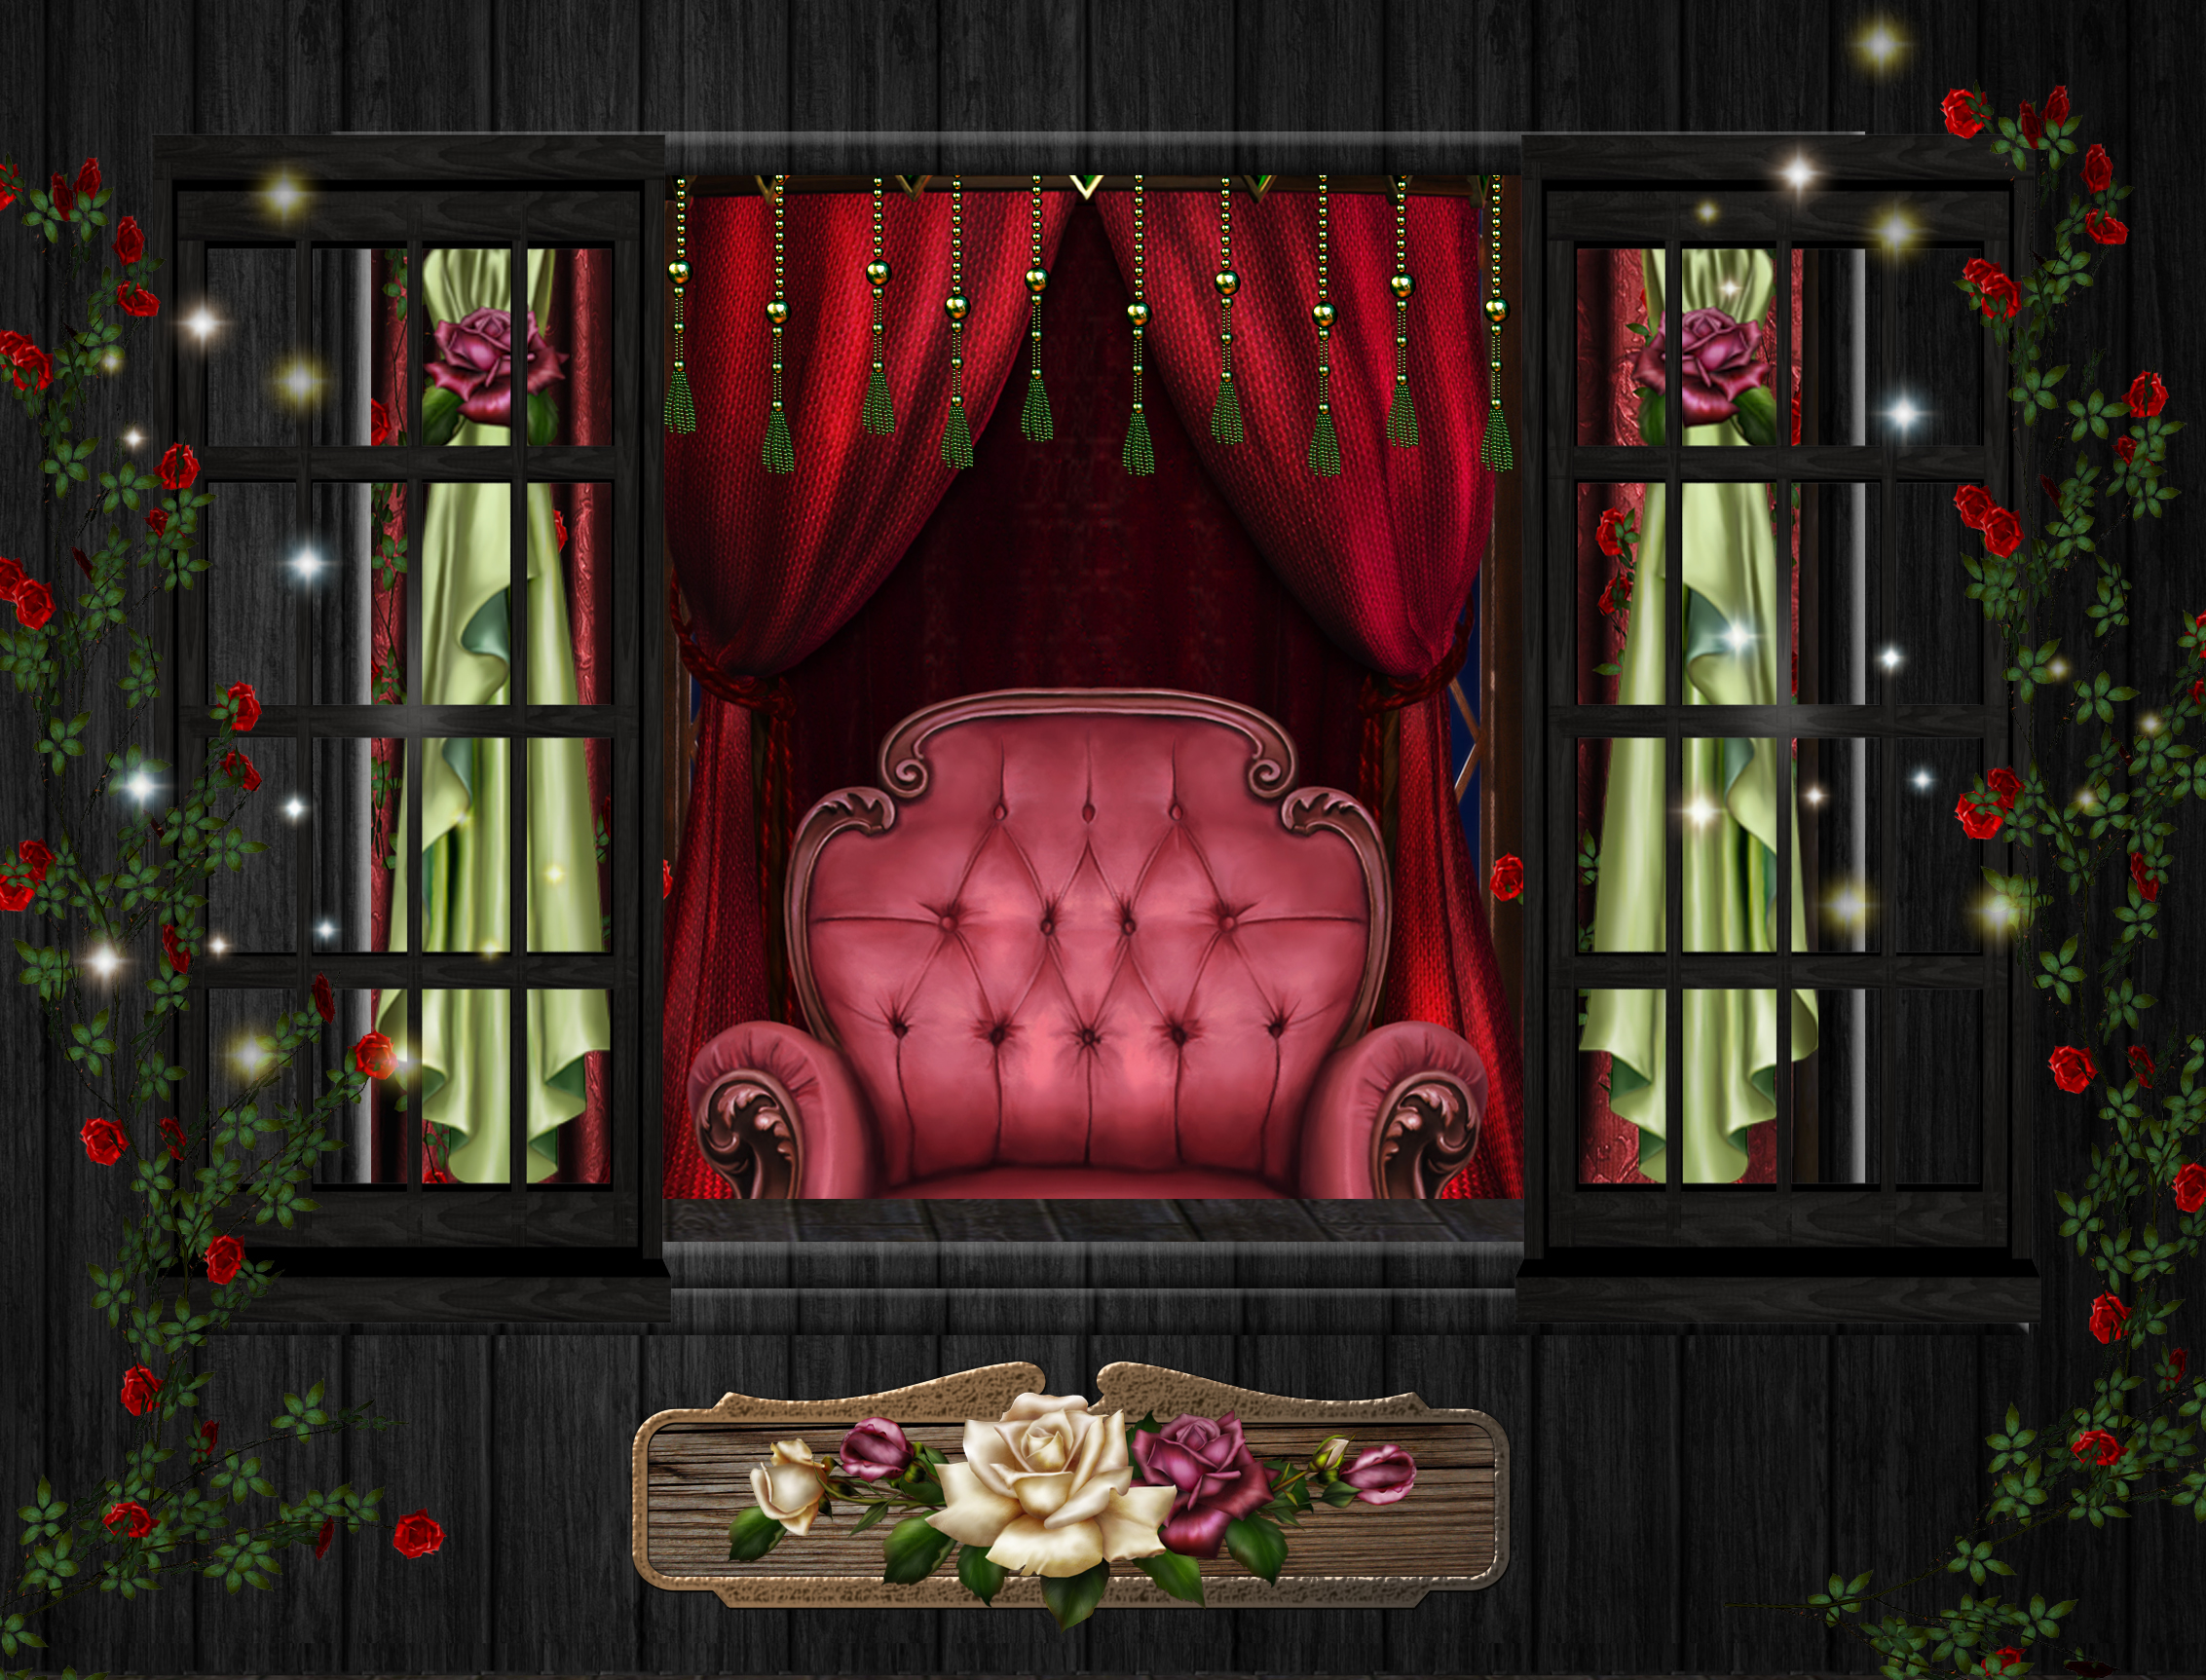 Artistic Window Chair Red Rose Pink Rose Curtain 2265x1725